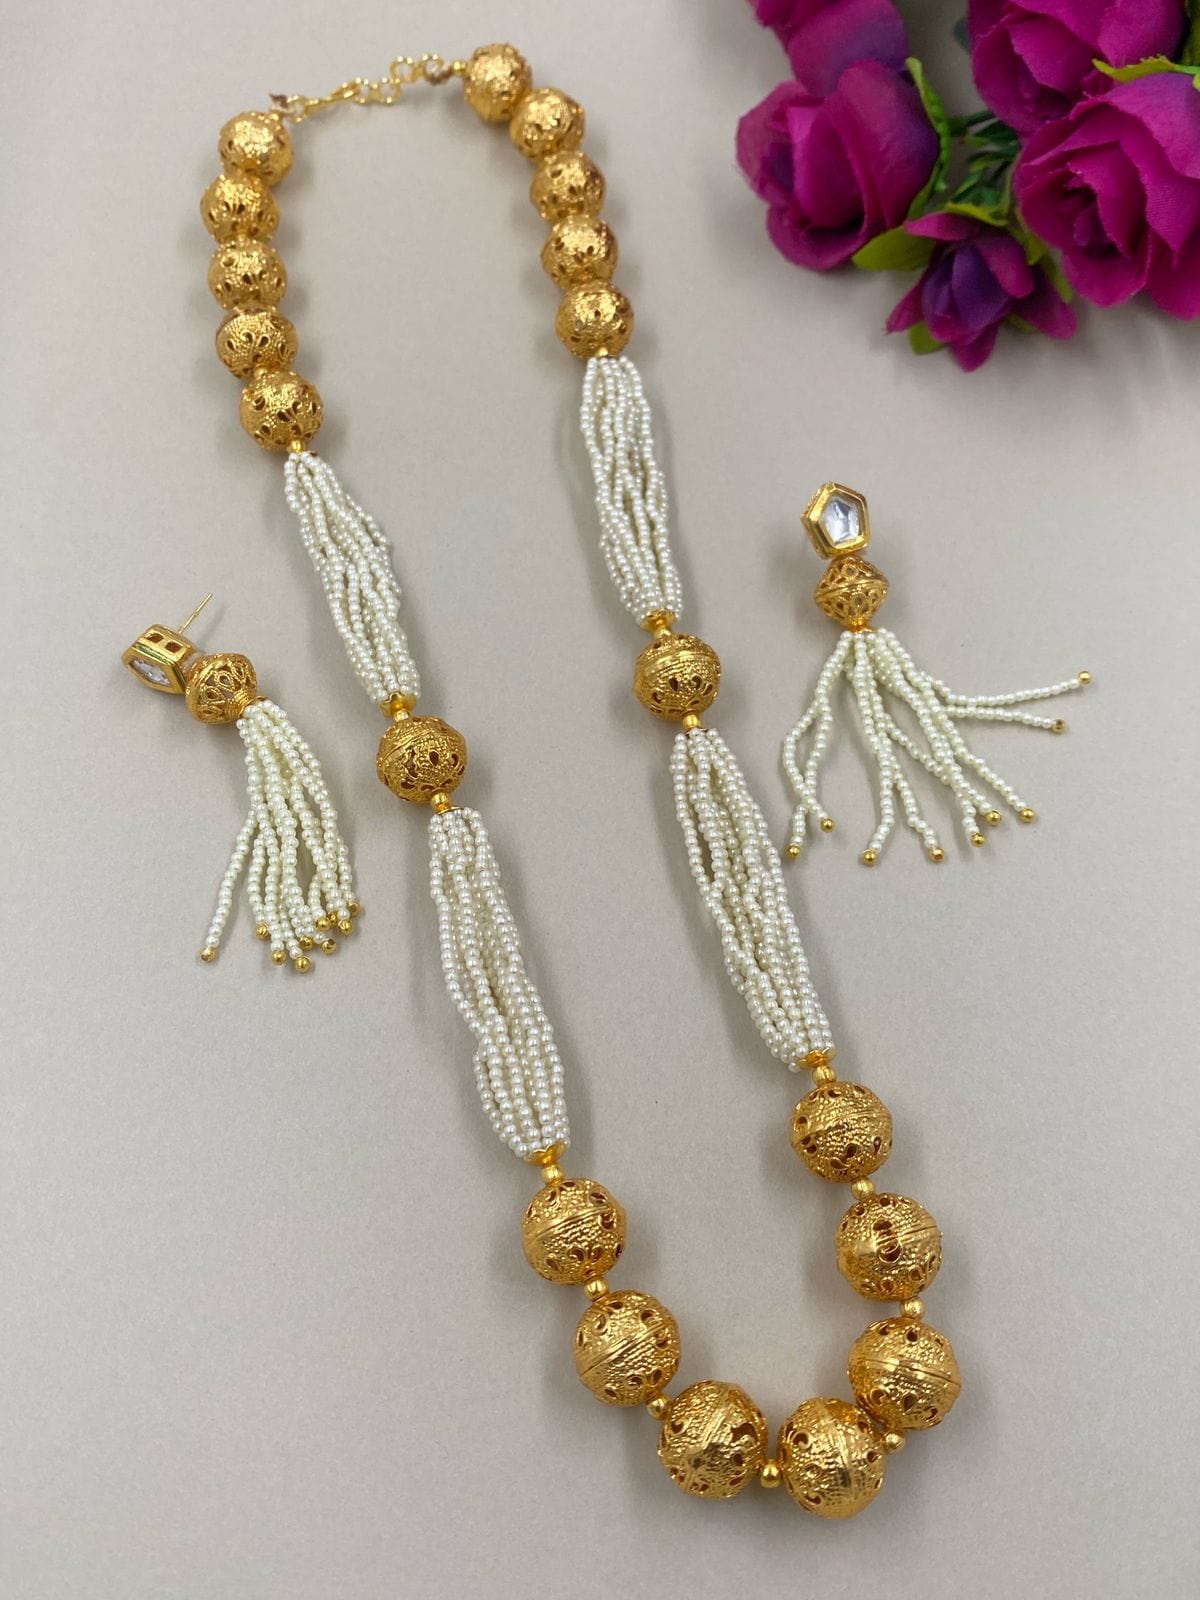 Fancy Pearls And Golden Beads Matar Mala Necklace For Woman By Gehna Shop Beads Jewellery